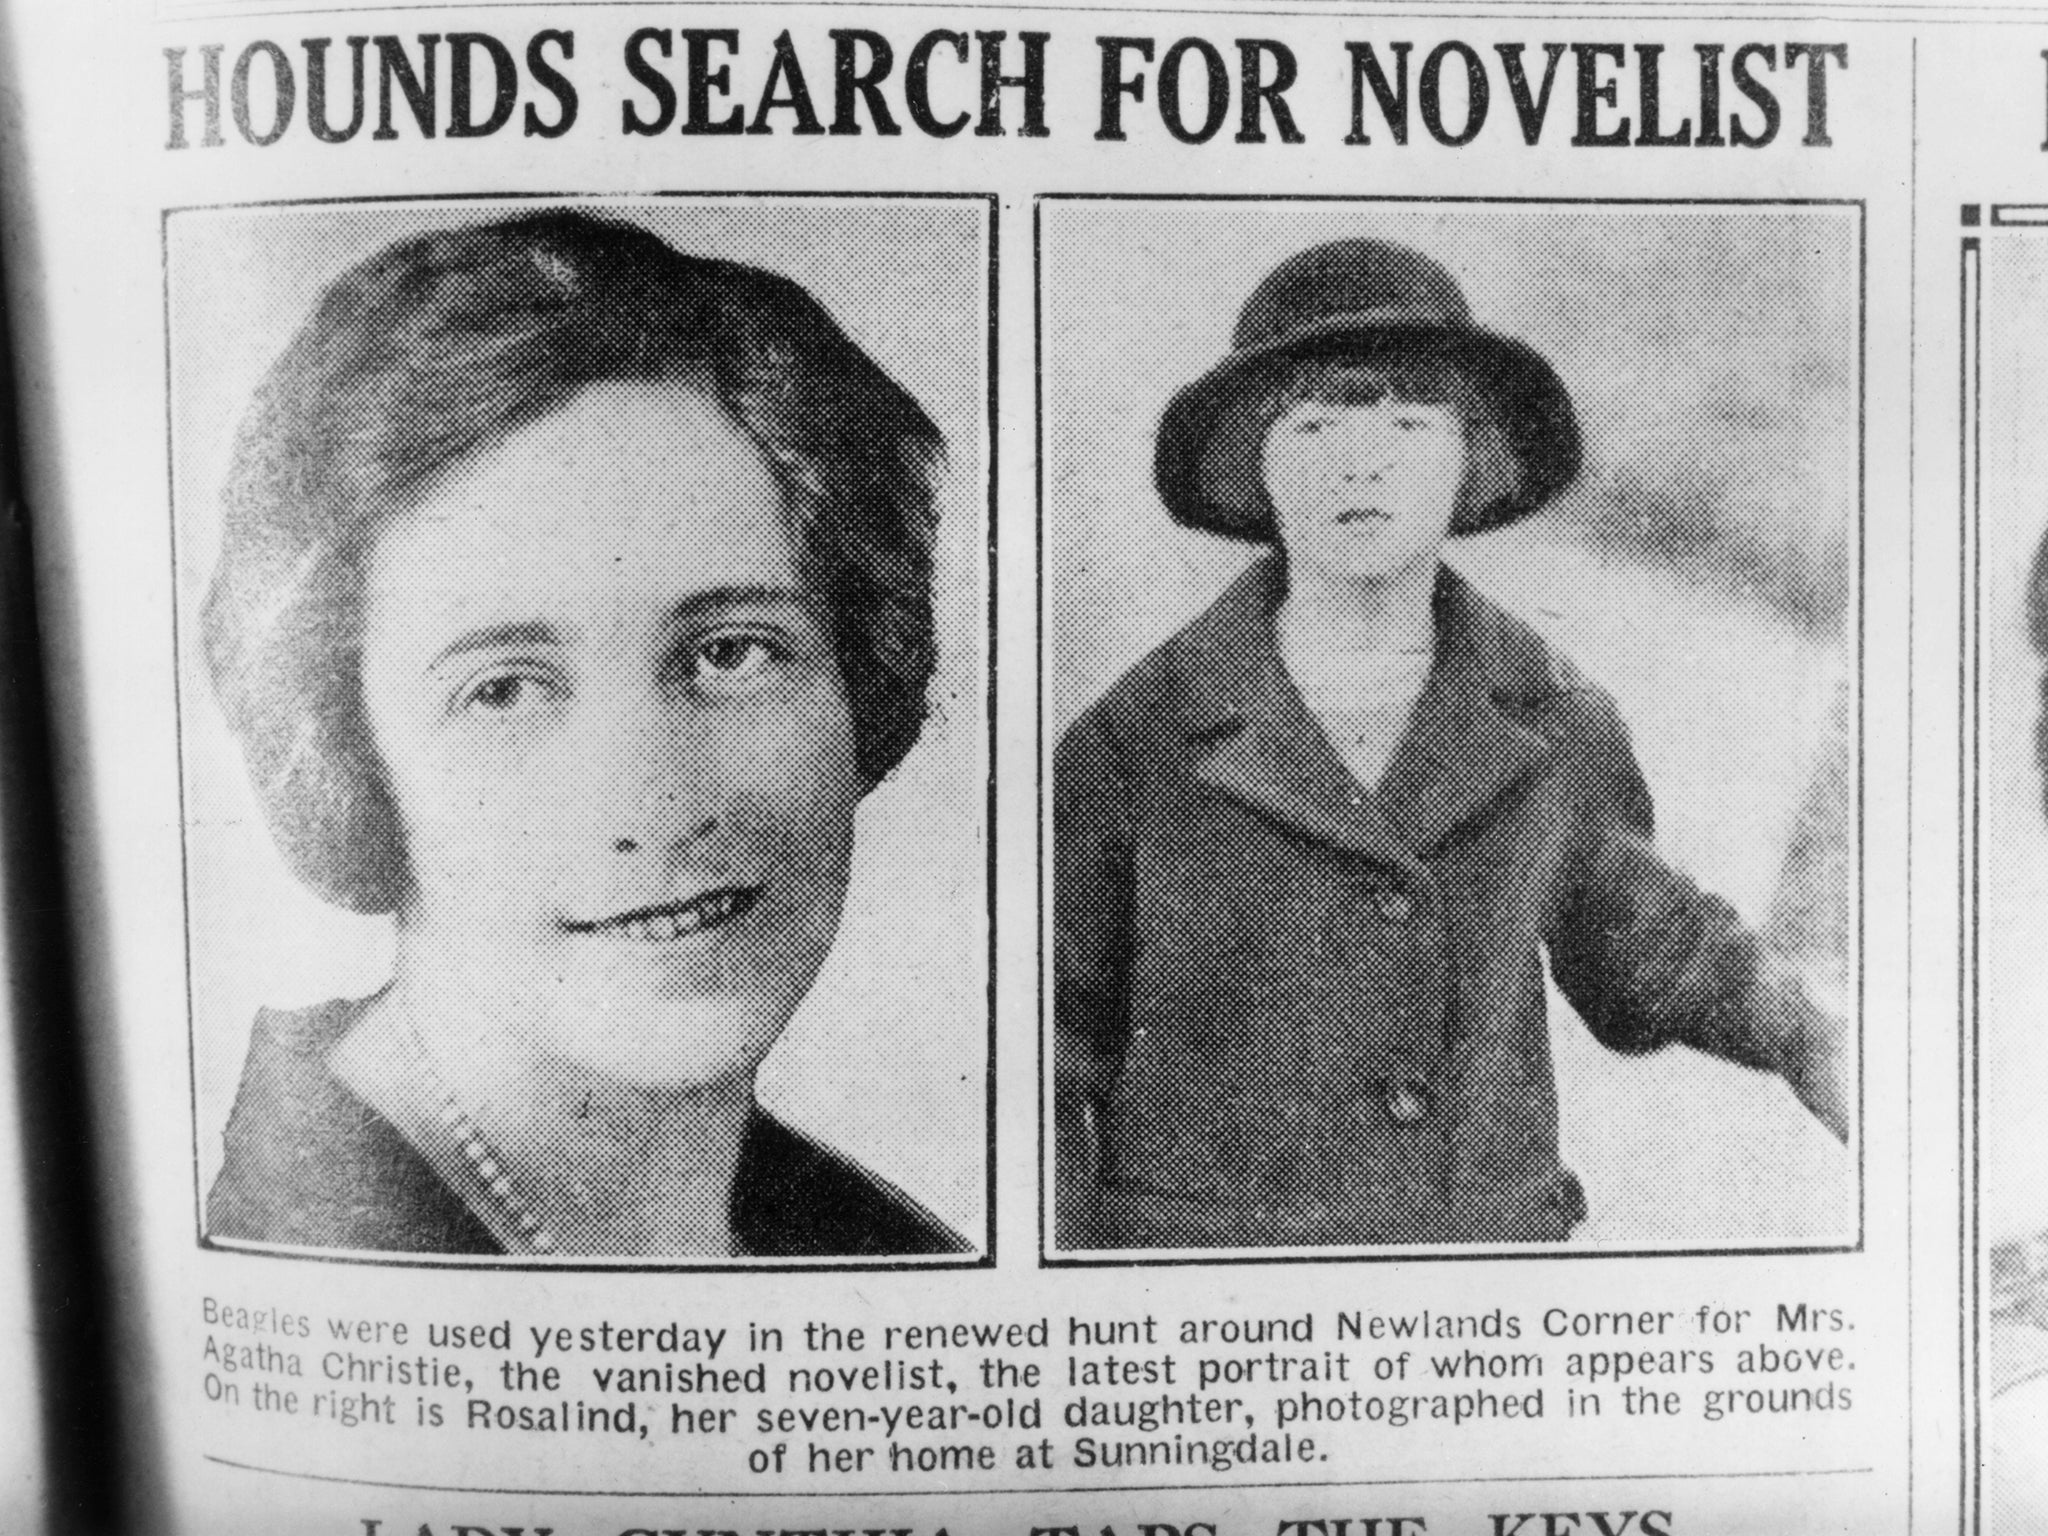 Agatha Christie’s mysterious disappearance sparked a massive search involving 1,000 police